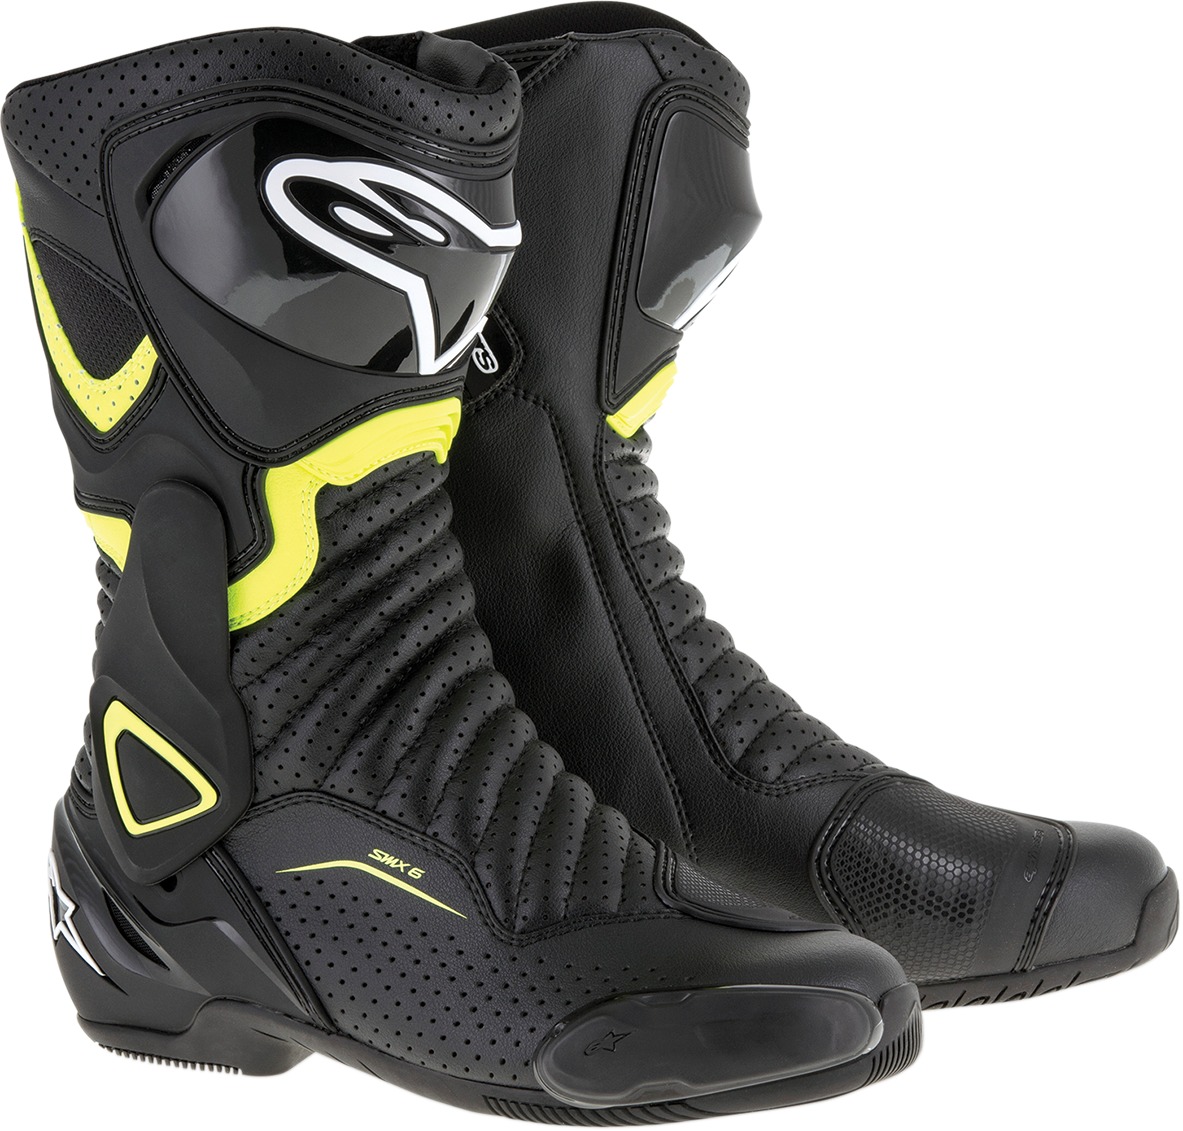 SMX-6v2 Vented Street Riding Boots Black/Yellow US 8 - Click Image to Close